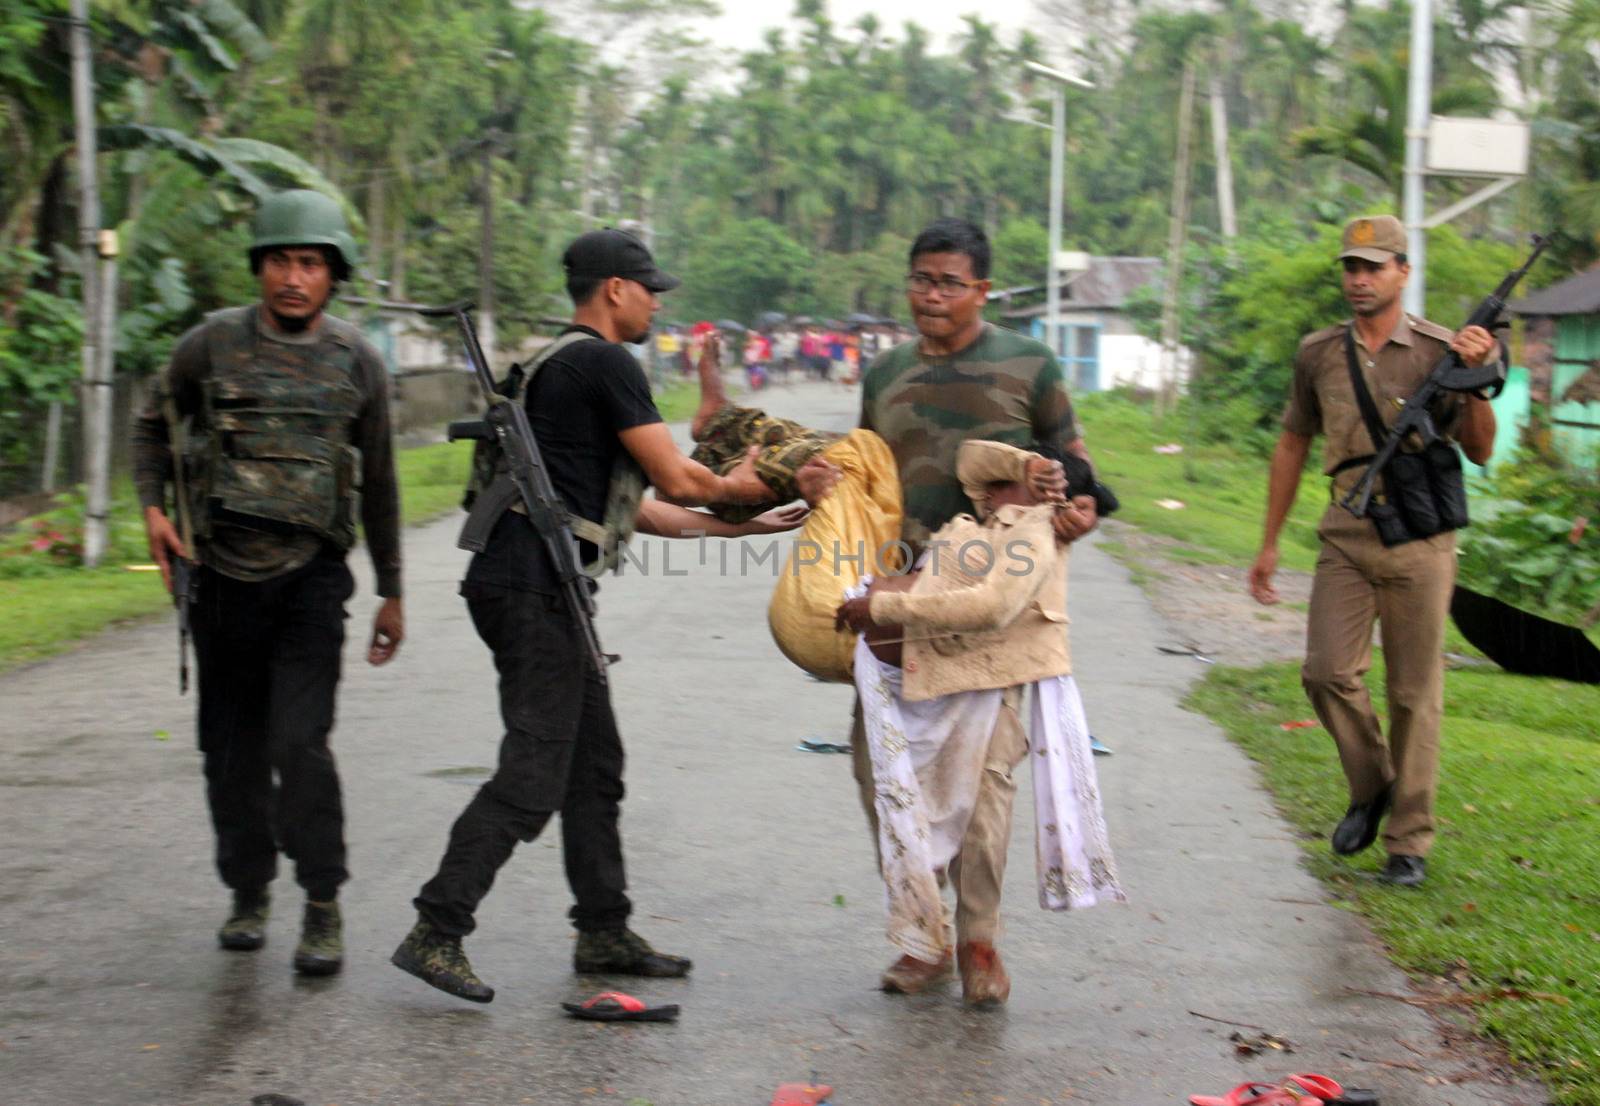 INDIA, Tinsukia: [WARNING: graphic content] Officers carry a man's body after a protest where at least eleven people were killed, and twelve others injured, when a high-voltage electric cable was hit by stray police fire and fell on protesters in Tinsukia, Assam, India on April 11, 2016. Protesters had reportedly stormed a police station, calling on police to hand over a group of suspects arrested for killing two people last week. Police opened fire to disperse protesters, and a stray bullet severed the power line, which fell and electrocuted demonstrators.